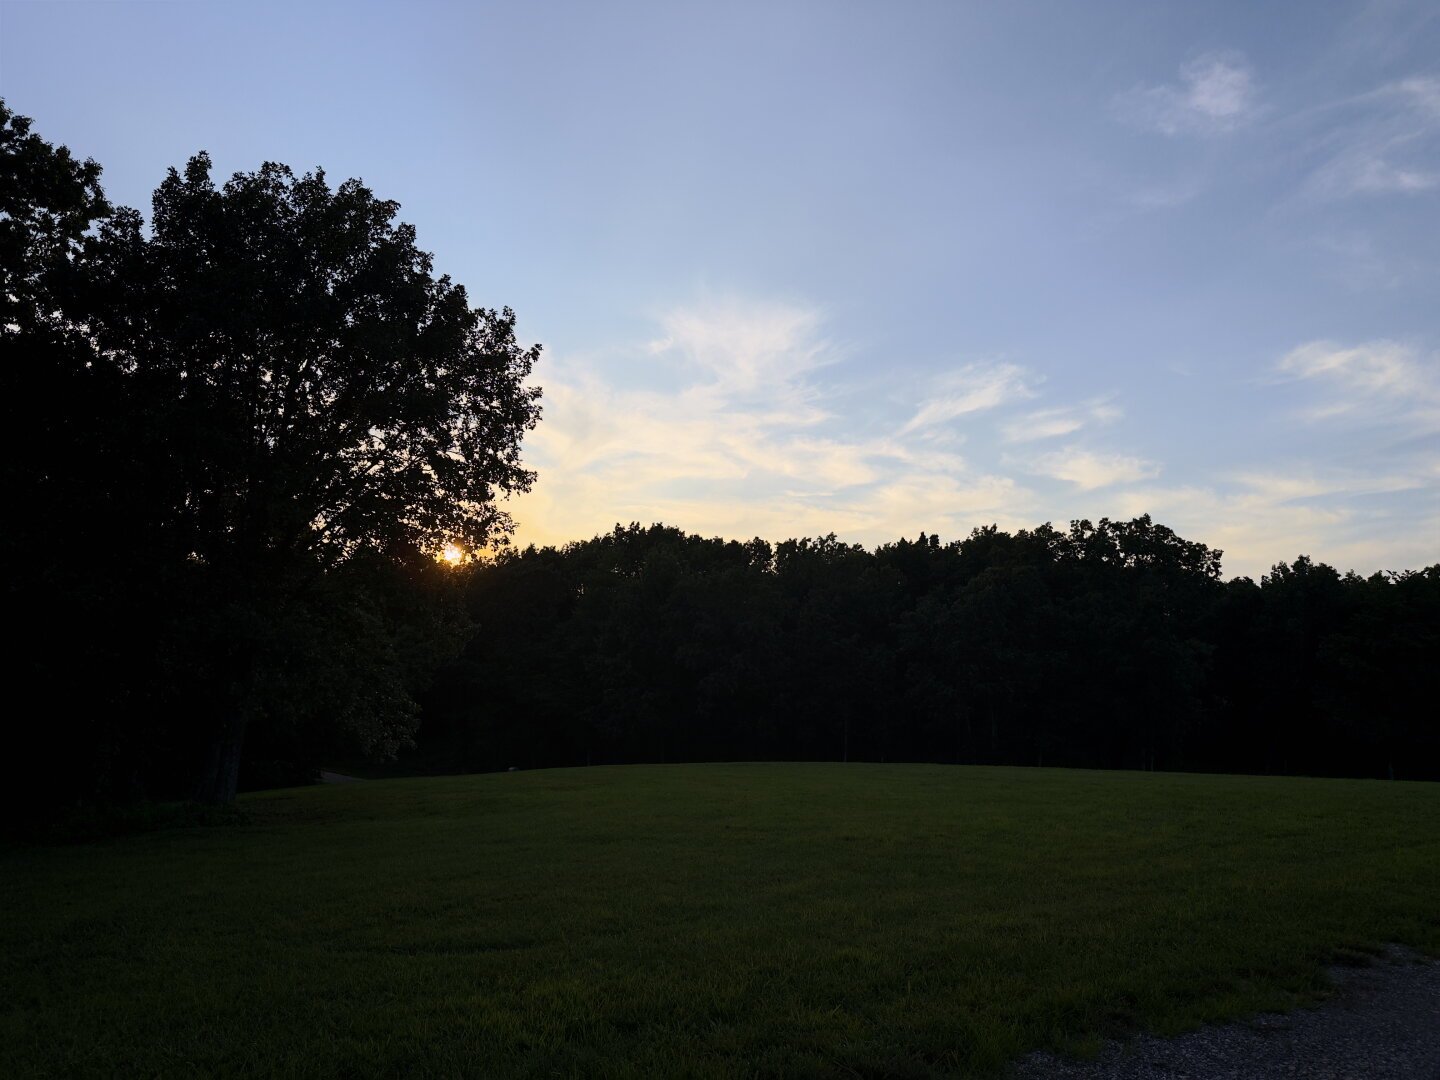 Sunset behind a tree and a forest, with a grassy field in the foreground and a partly cloudy sky above.